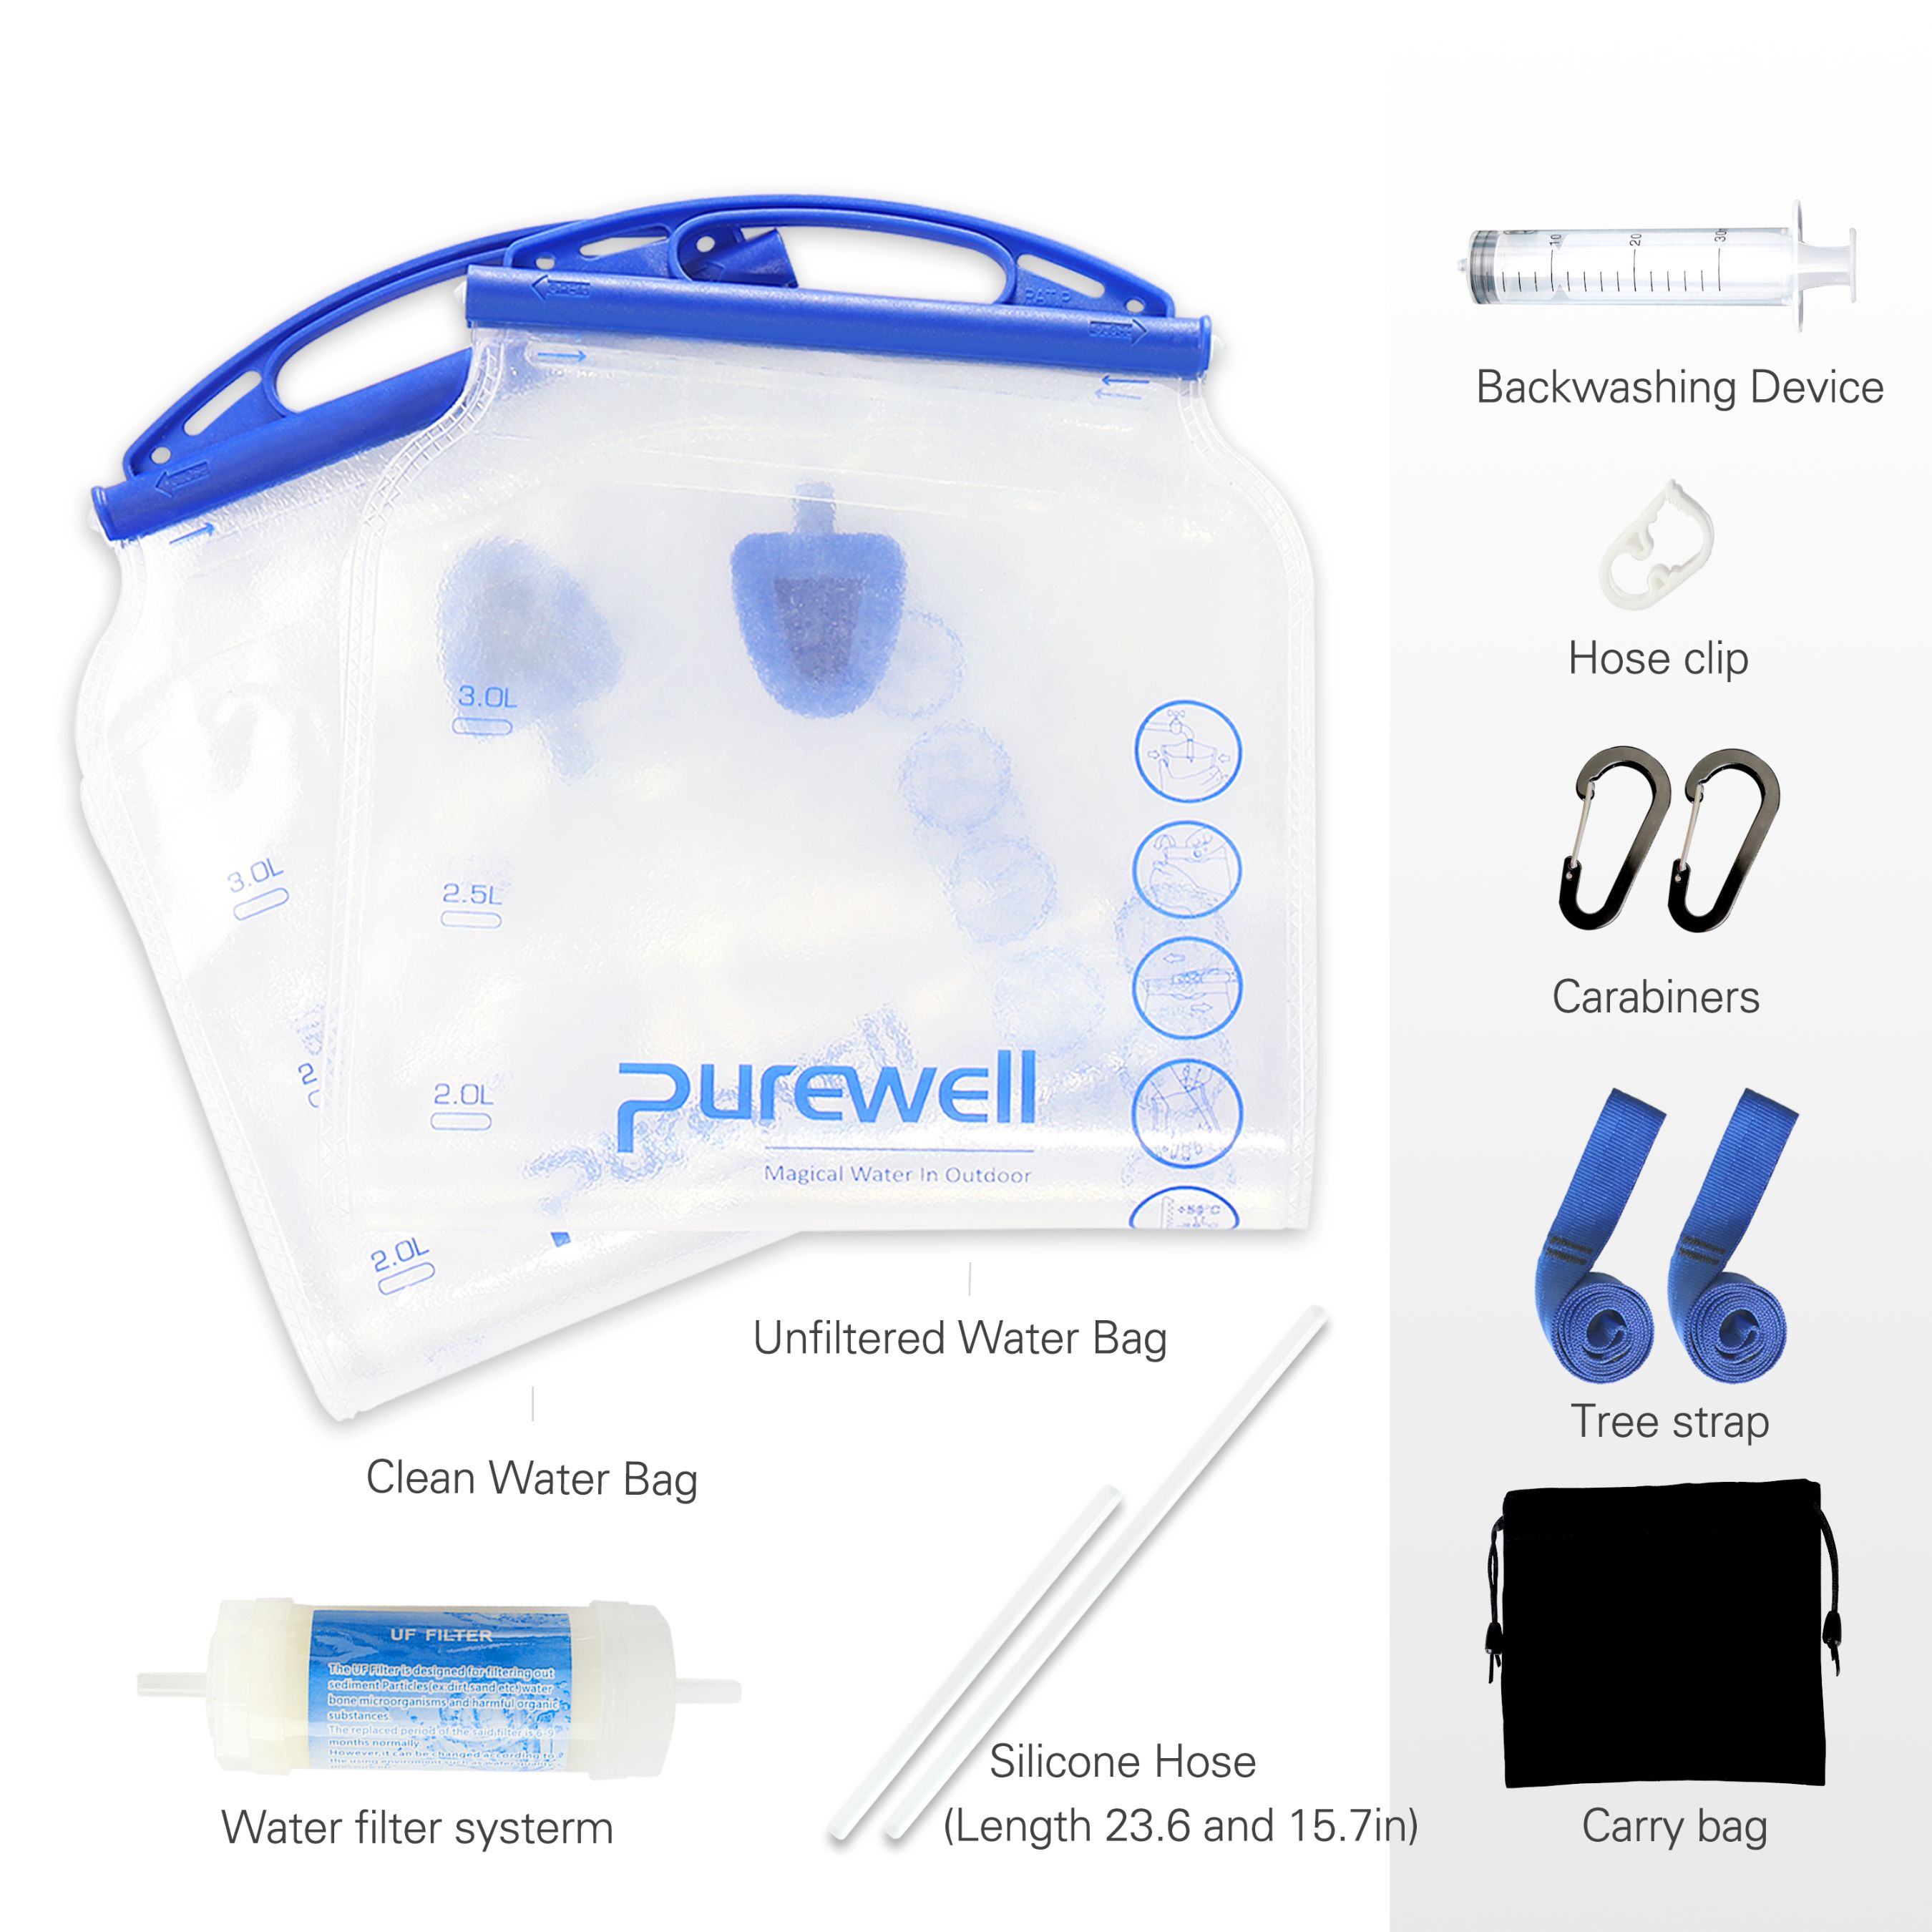 Purewell Array image300